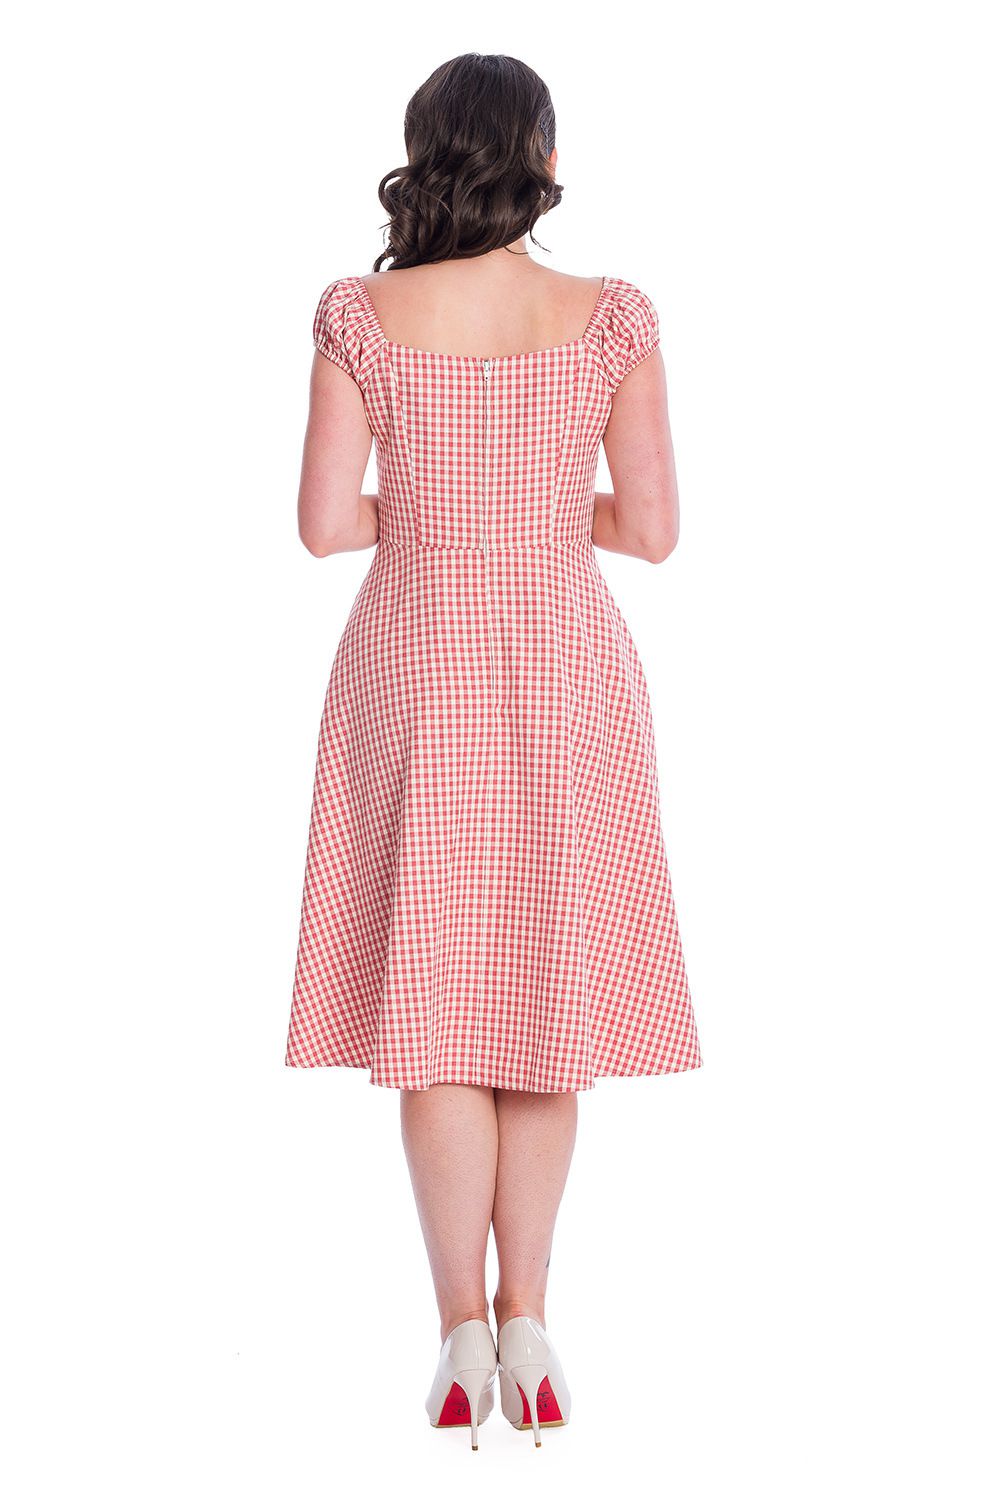 BNDR16623bb_robe-retro-pinup-50-s-rockabilly-banned-gingham-picnic